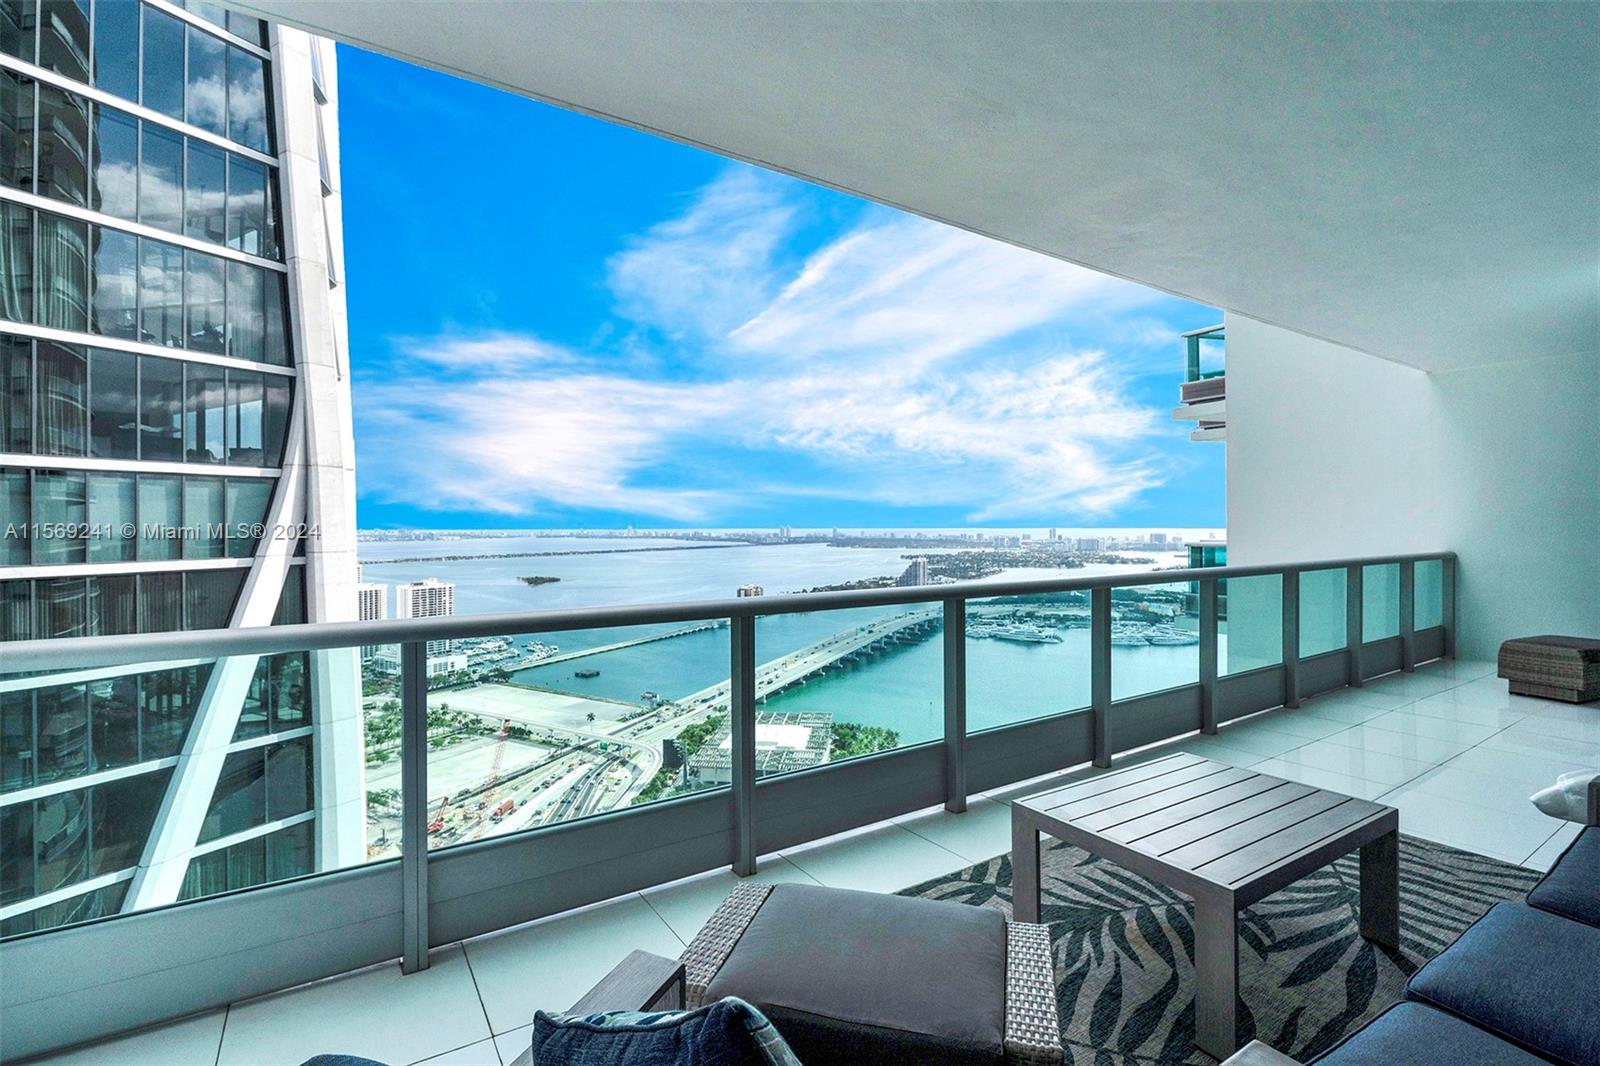 Beautiful and Luxurious Condo located on the 53rd Floor, with a private 10-Foot deep terrace overlooking Biscayne Bay, Museum Park, Venetian Islands & the Miami Beach Skyline. Views extend past Miami Beach to the Atlantic Ocean and as far north as the Sunny Isle Beach skyline. The condo is available fully furnished, with 2-Bedrooms + Den with a built-in Queen-Size Murphy Bed, along with 3-Full Bathrooms with walk-in showers. This unit offers a private elevator foyer leading into the interior space with 10-Foot ceilings, floor-to-ceiling impact windows, custom lighting, white marble floors, custom built-out closets, modern kitchen with chef's island, marble countertops & Miele/Sub-Zero appliances, custom-built wet bar, master bath with soaking tub & glass-enclosed shower & in-unit laundry.